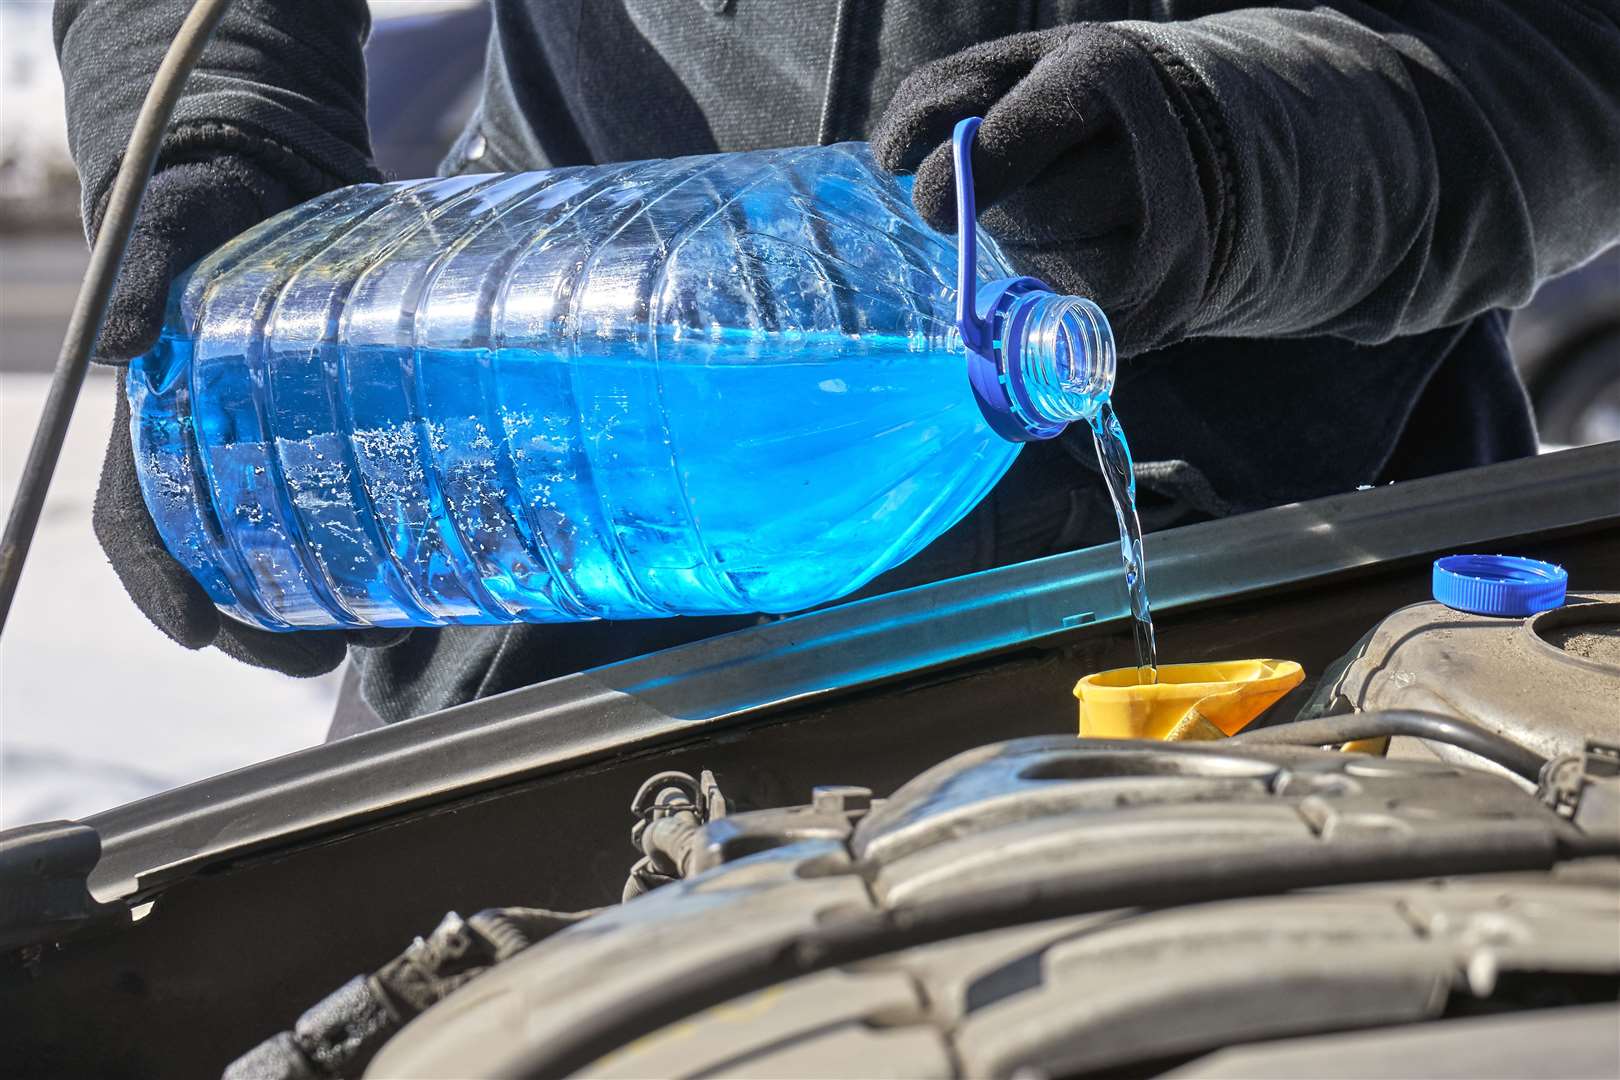 Antifreeze being poured into a car engine